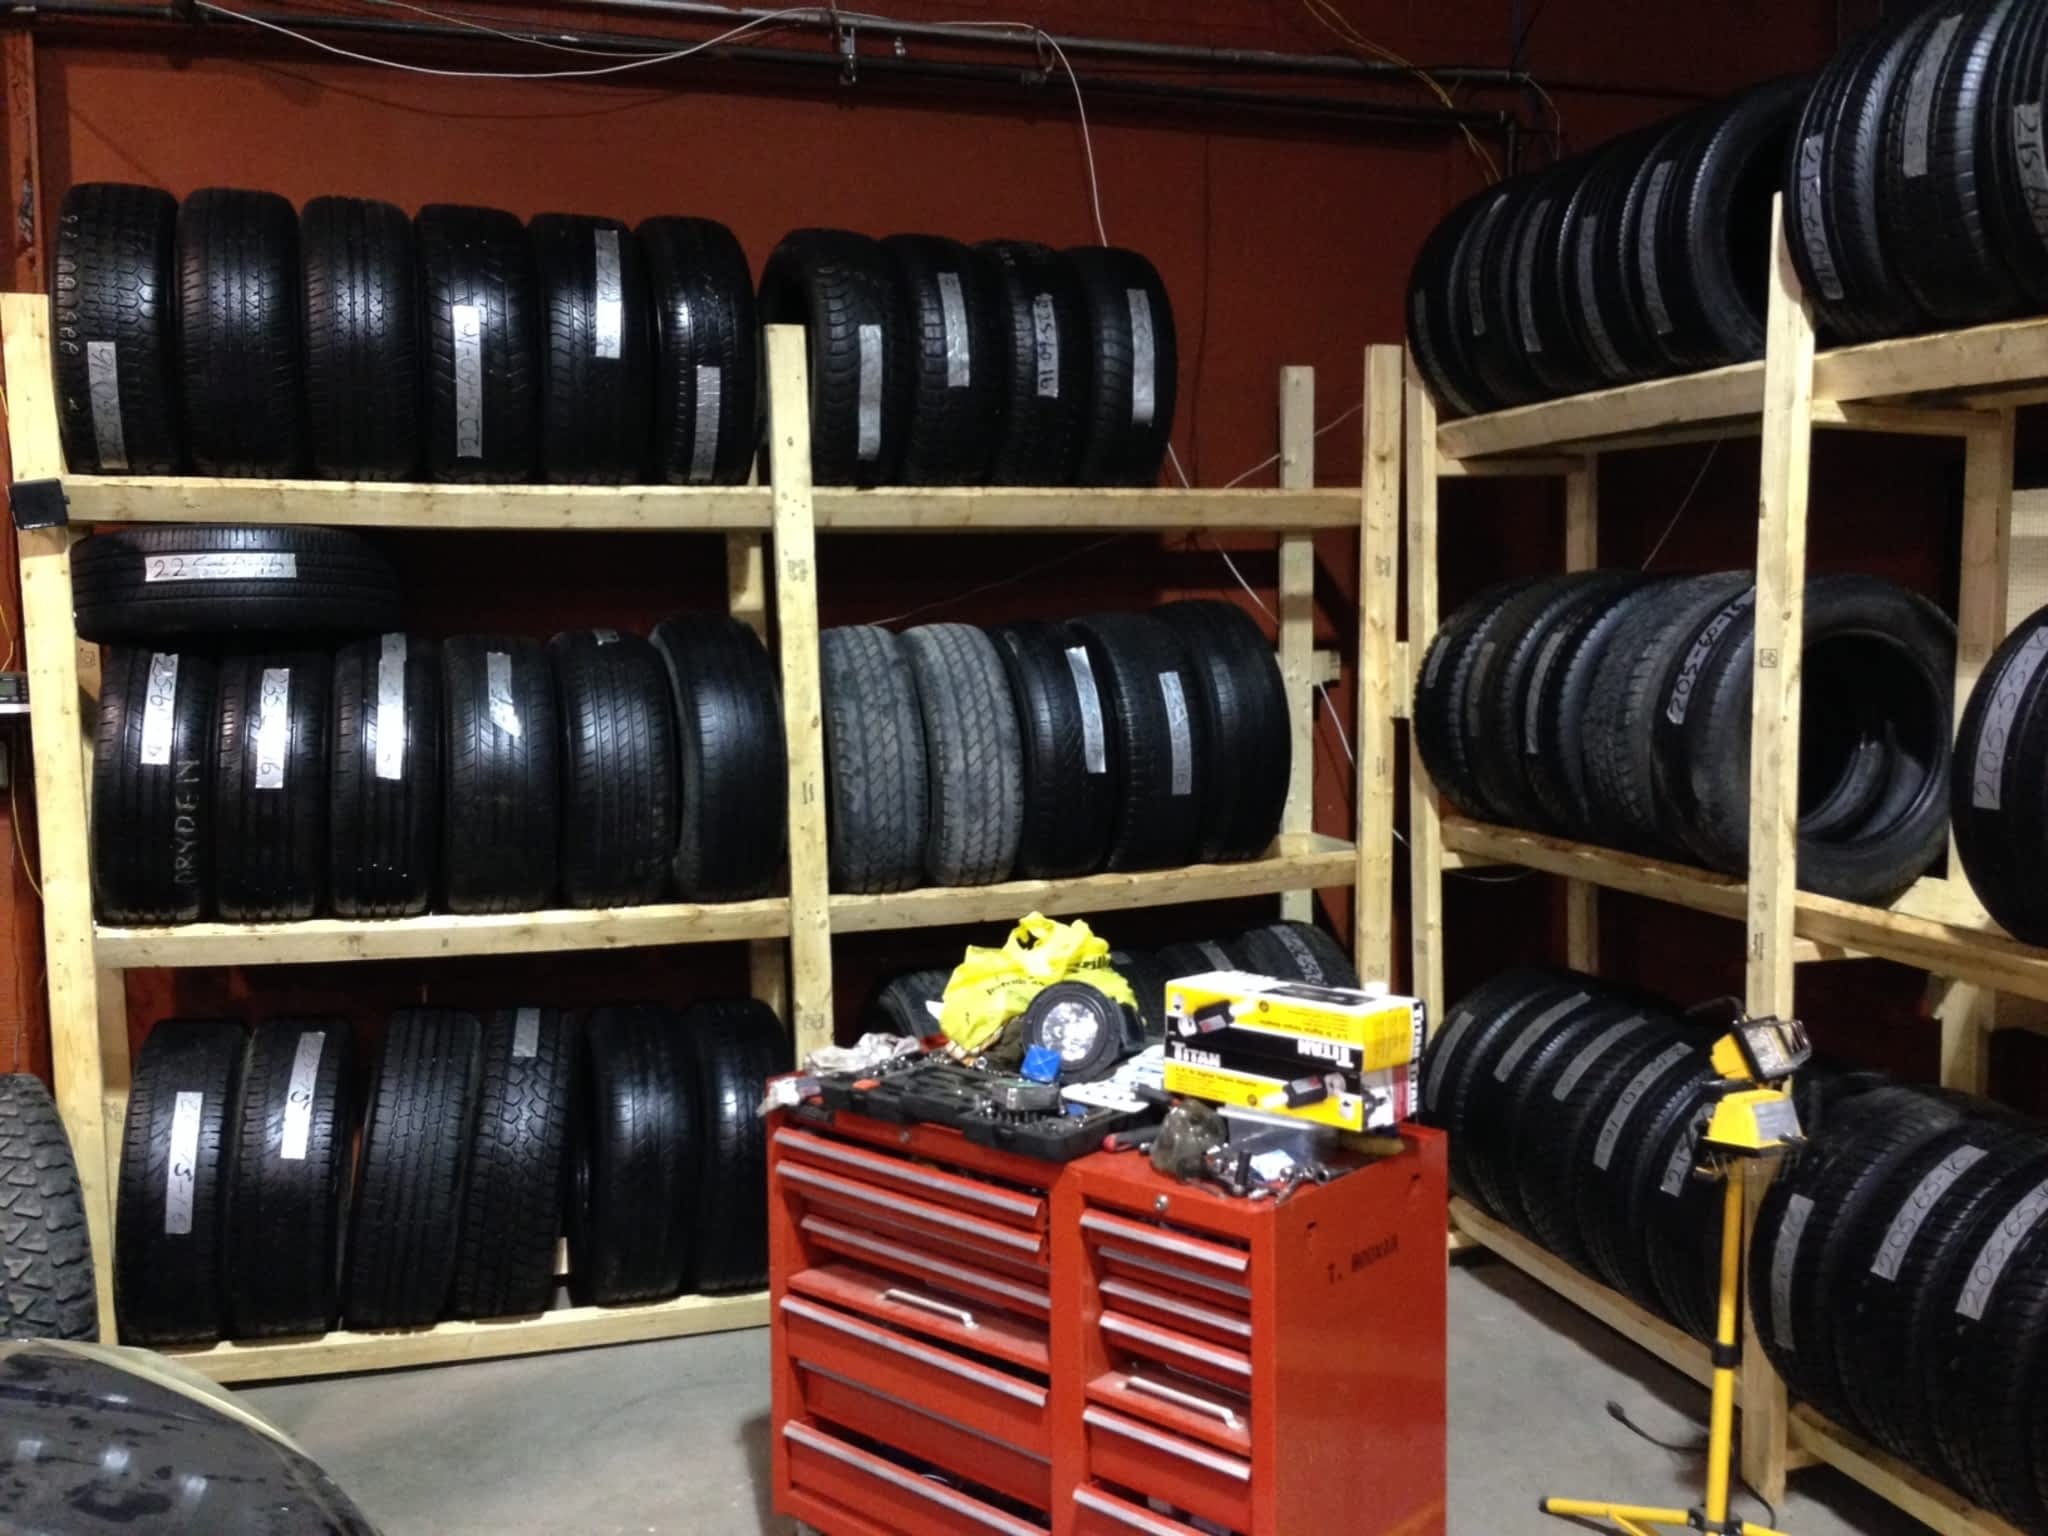 photo Tires for Less